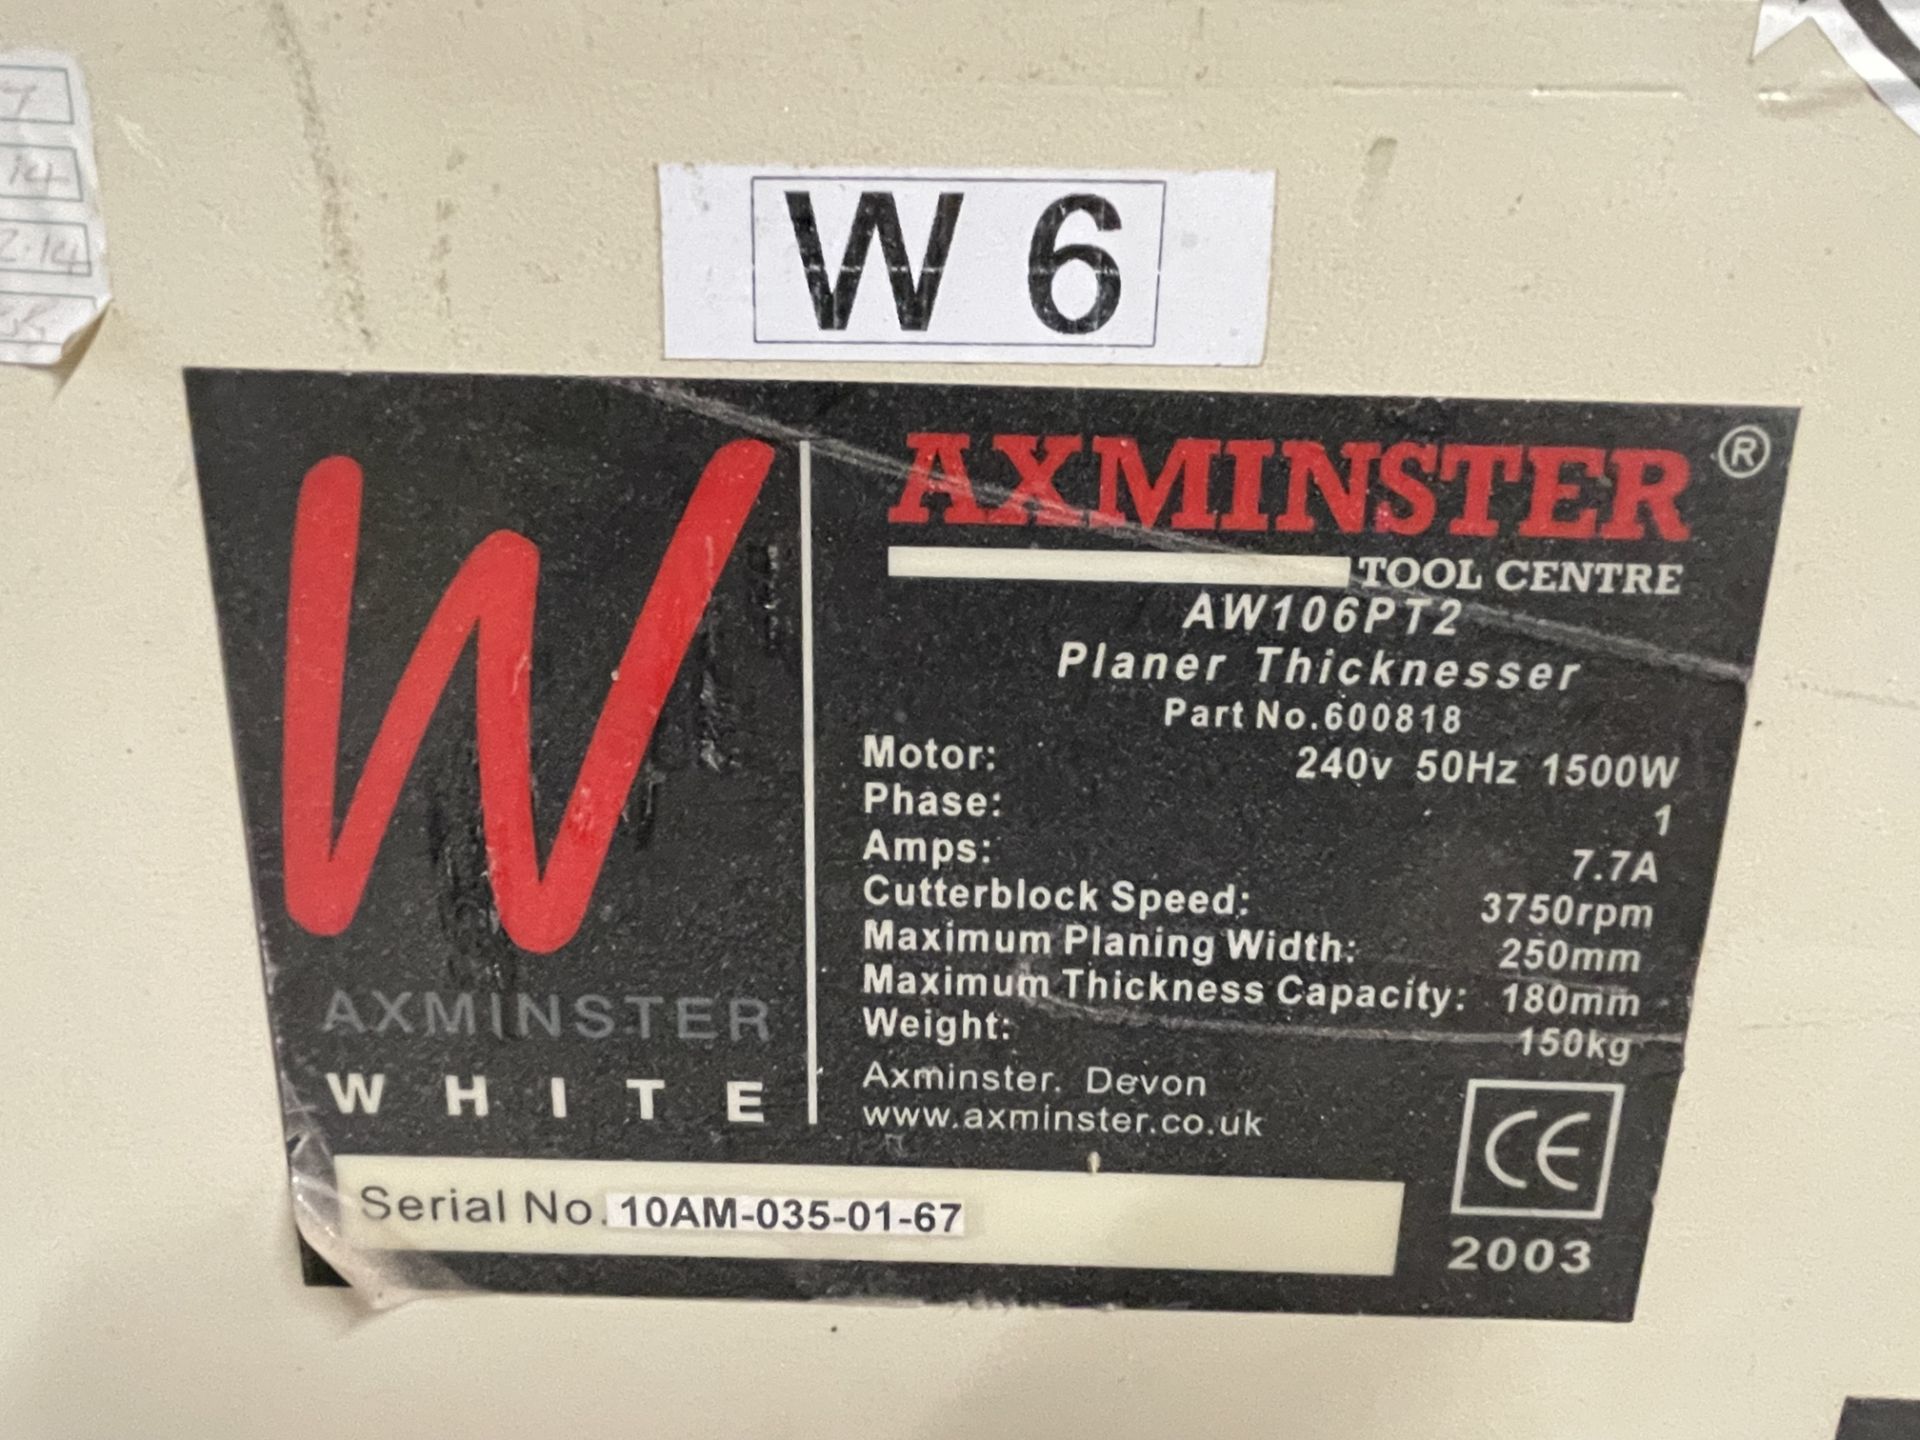 2003 Axminster White Series AW106PT2 250x180mm Max Capacity Planer Thicknesser S/No. 10AM-035-01067, - Image 5 of 5